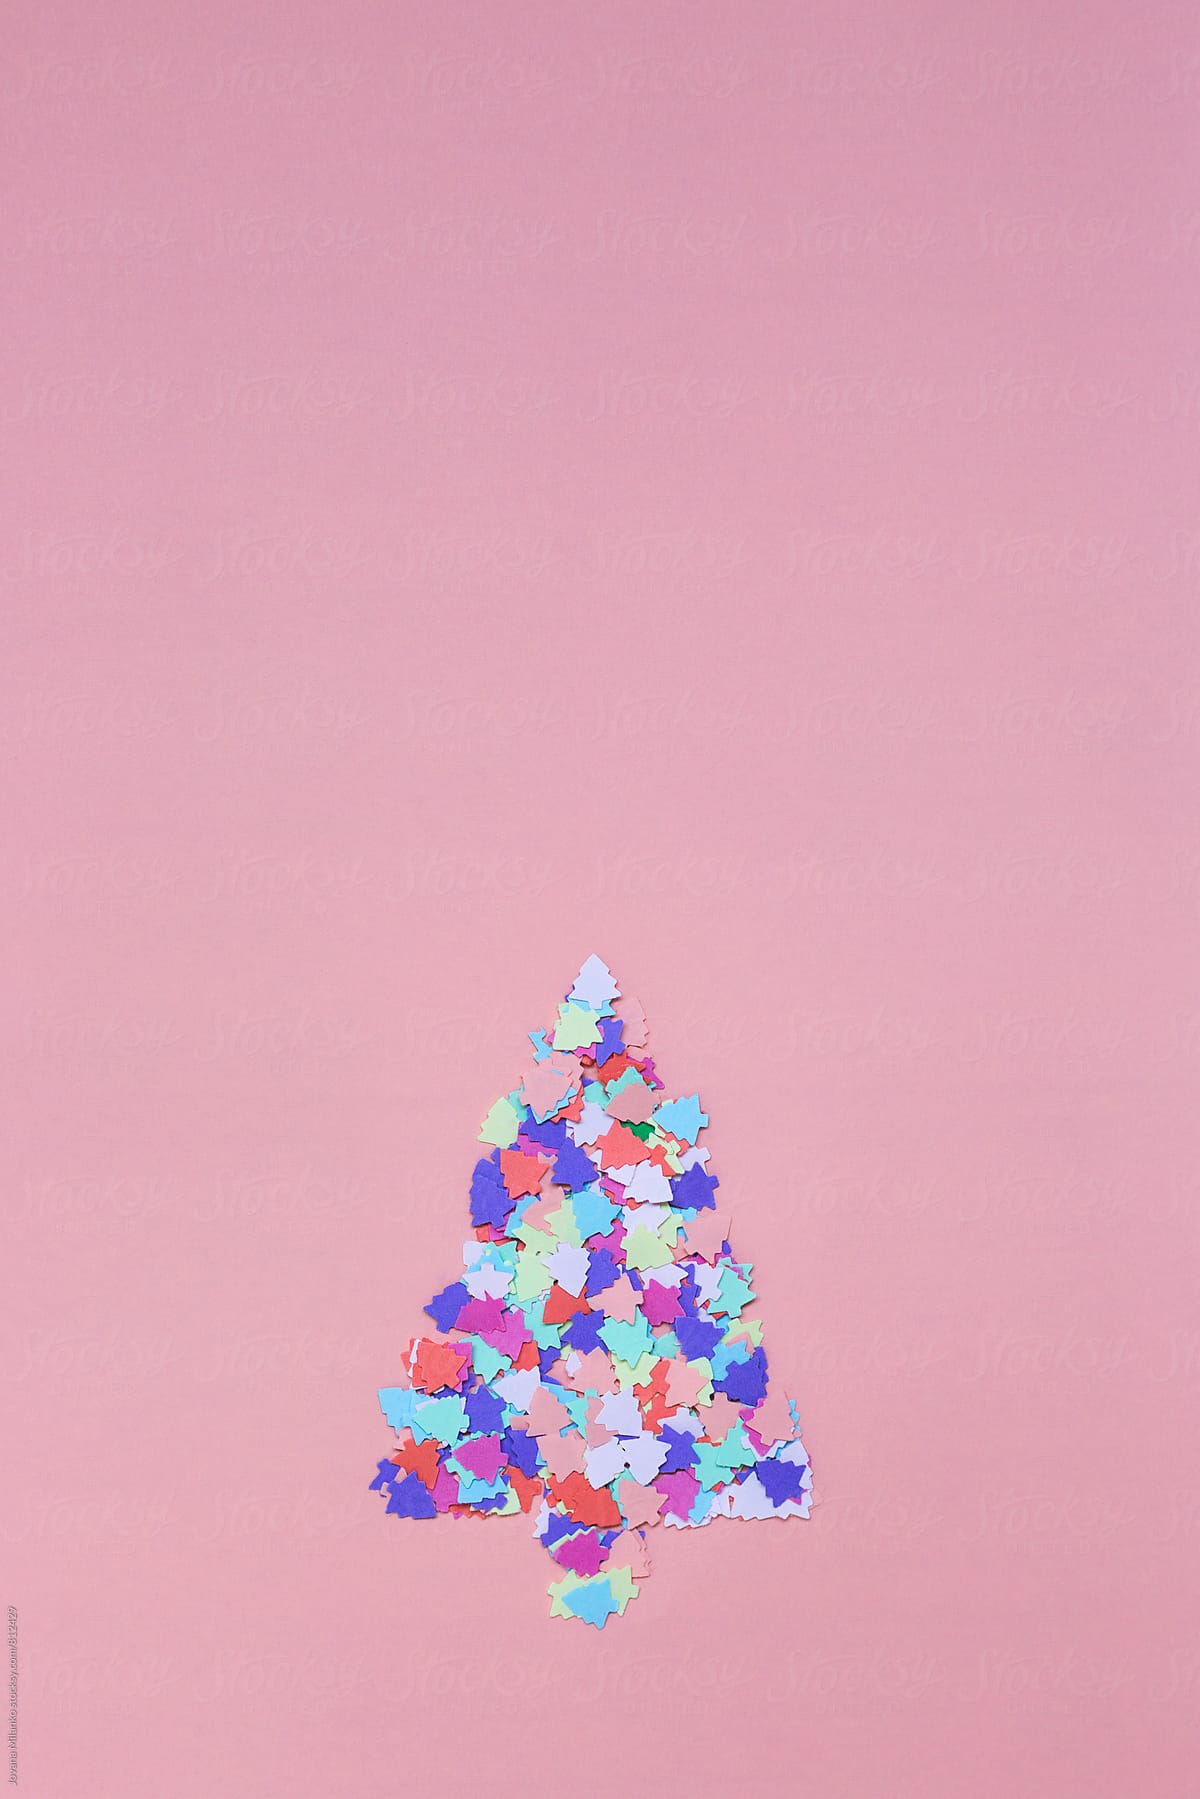 Confetti cut in a shape of a Christmas tree making a bigger Christmas tree on a pink background